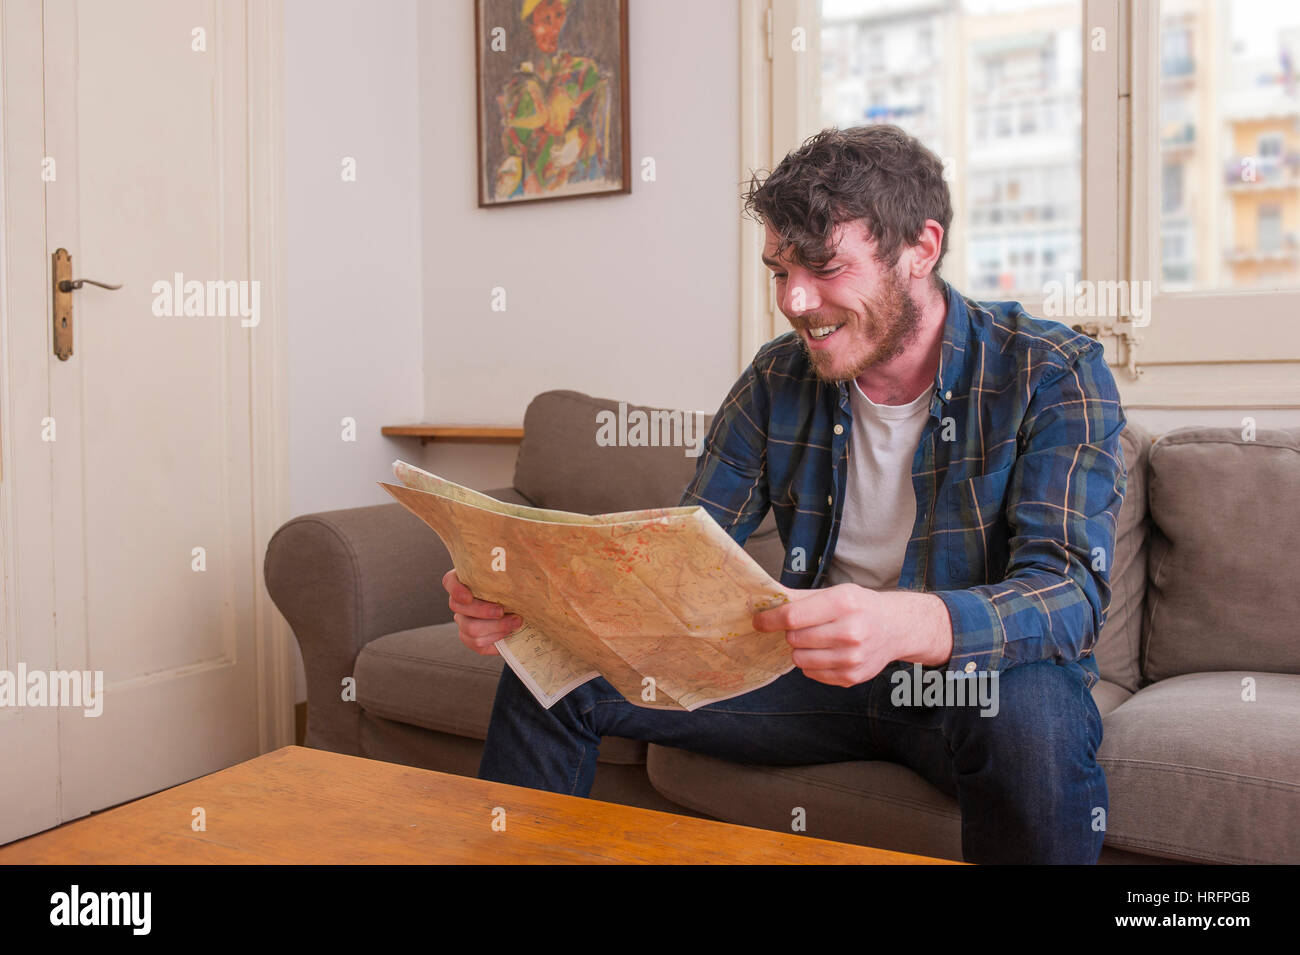 Young man at his living room with a plaid shirt and a map Stock Photo